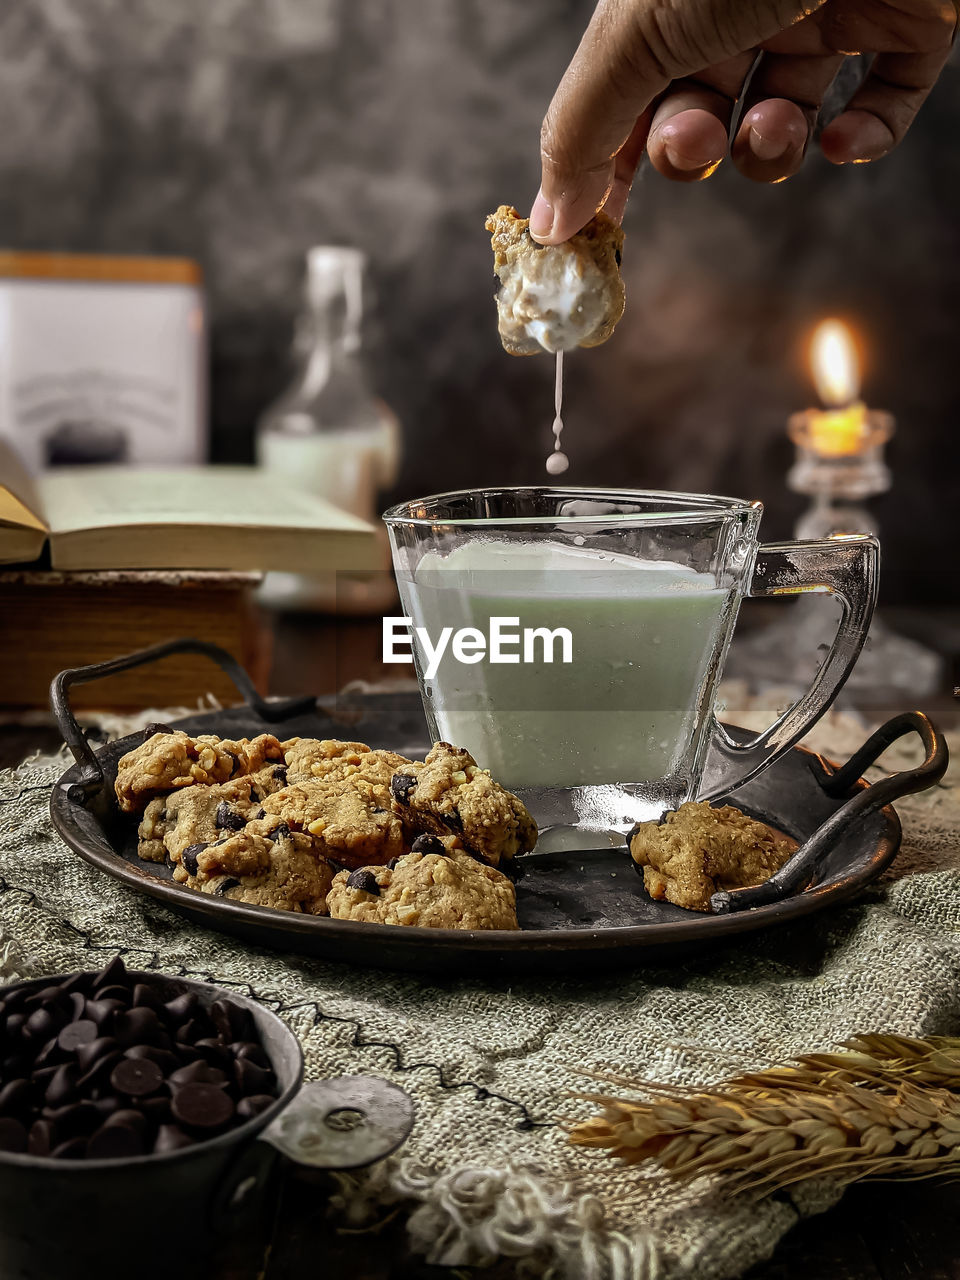 Cropped hand of person dipping a cookies in a glass of milk on table